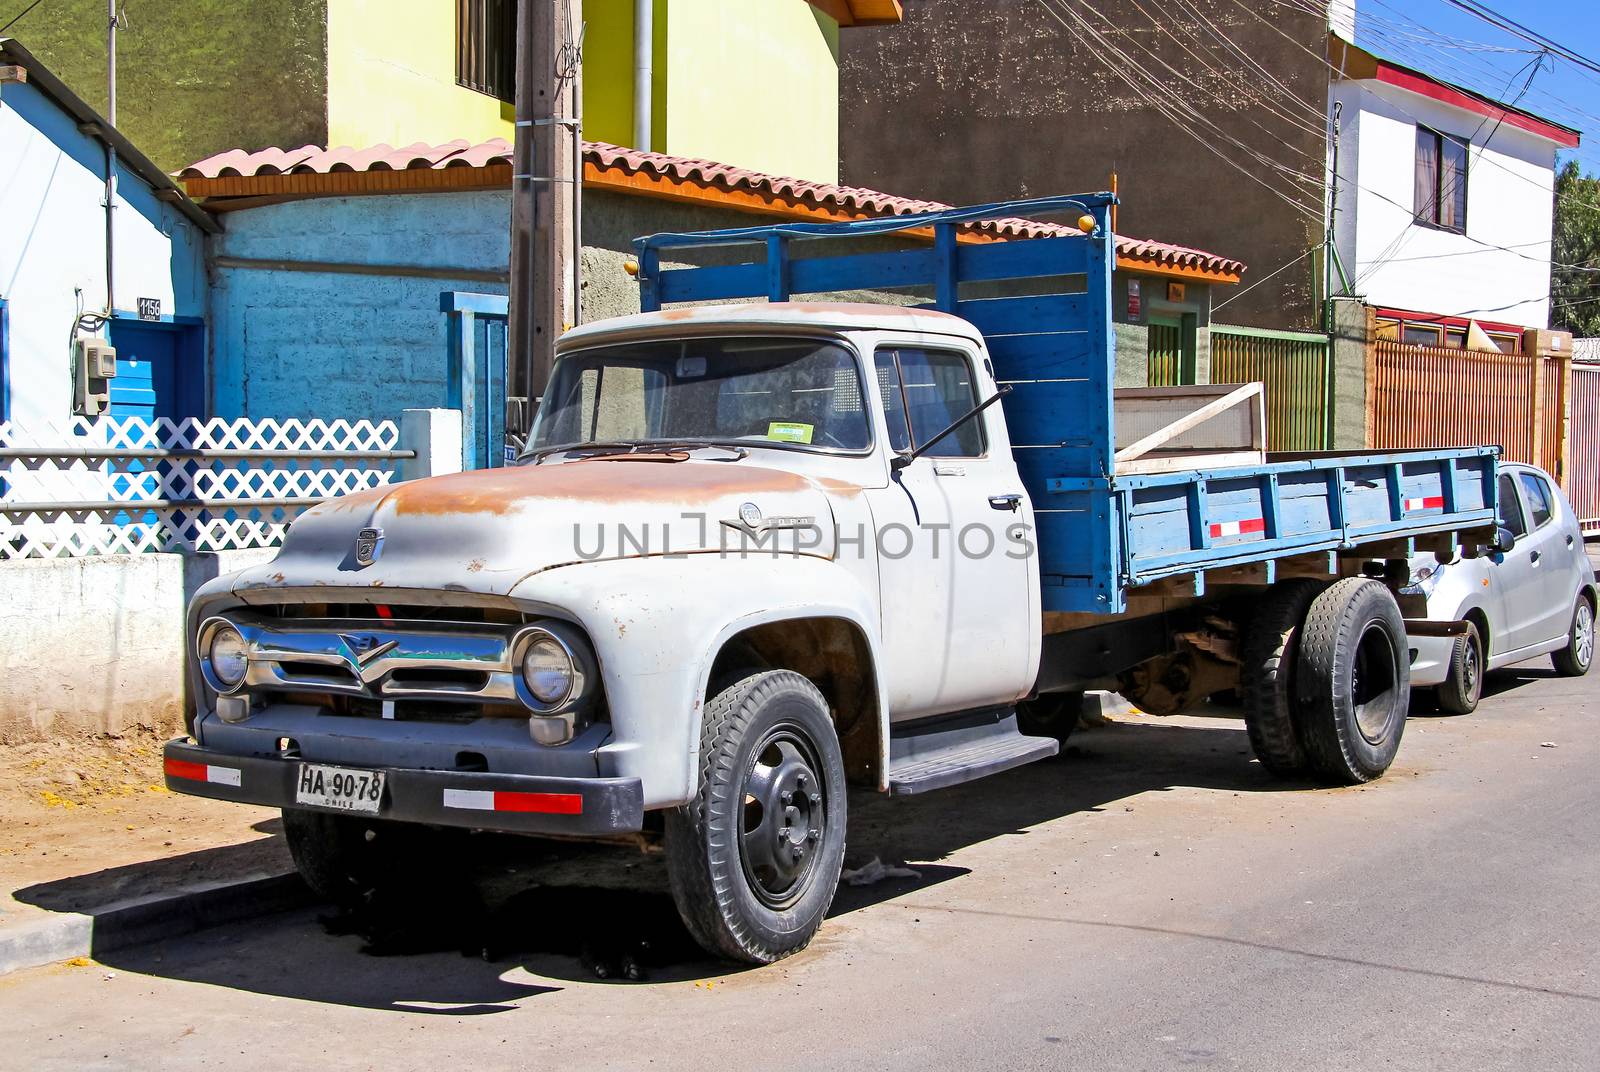 CALAMA, CHILE - NOVEMBER 17, 2015: Retro truck Ford F600 at the town street.